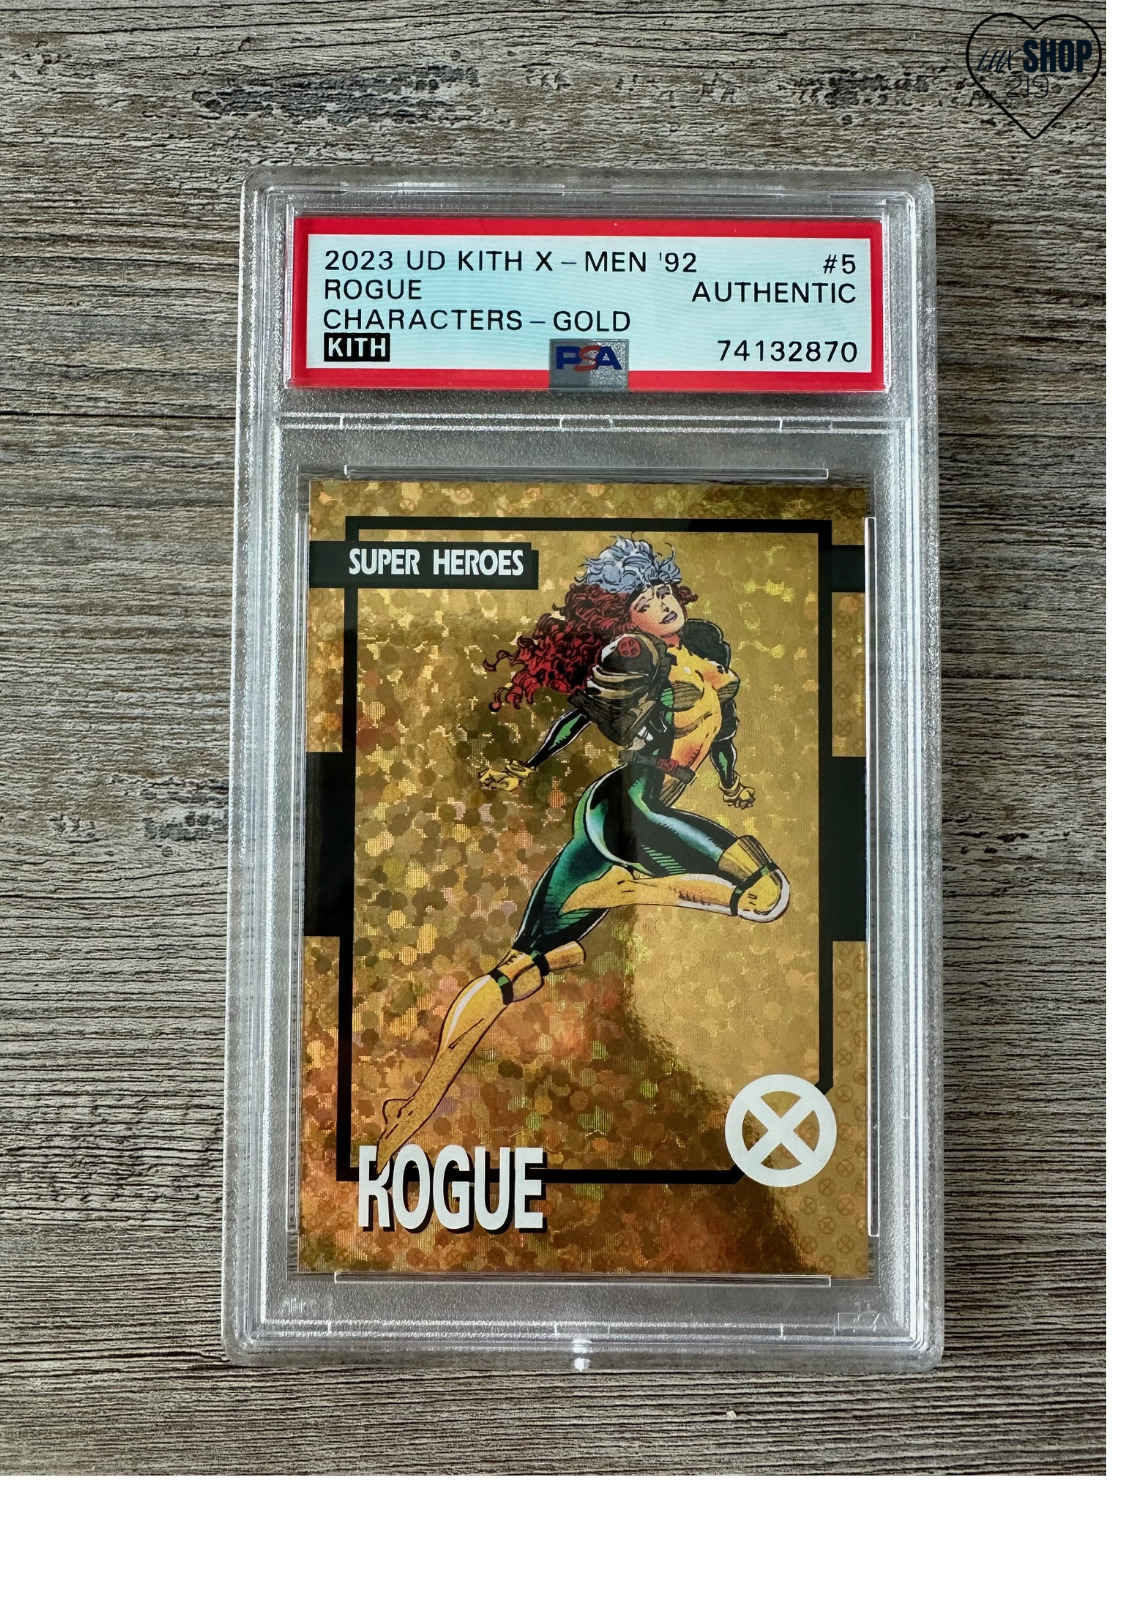 2023 UD KITH X - MEN '92 ROGUE CHARACTERS - GOLD #5 AUTHENTIC